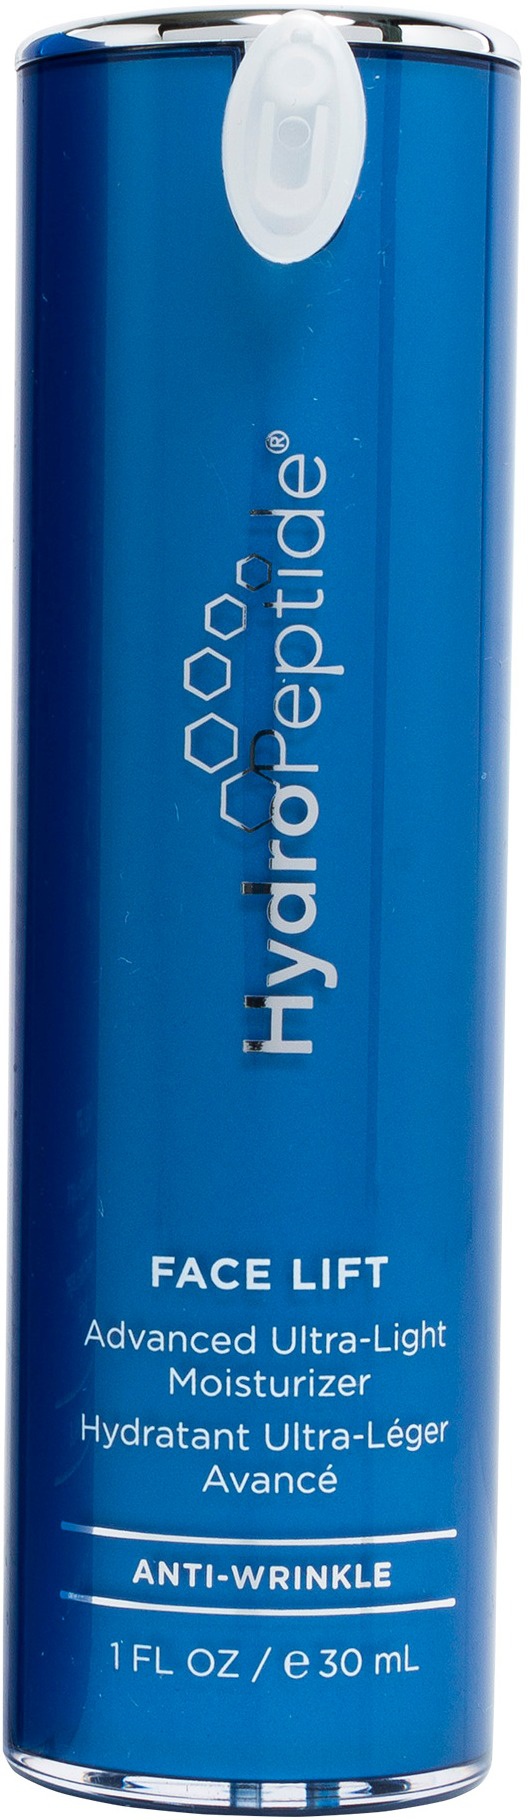 HydroPeptide Face Lift